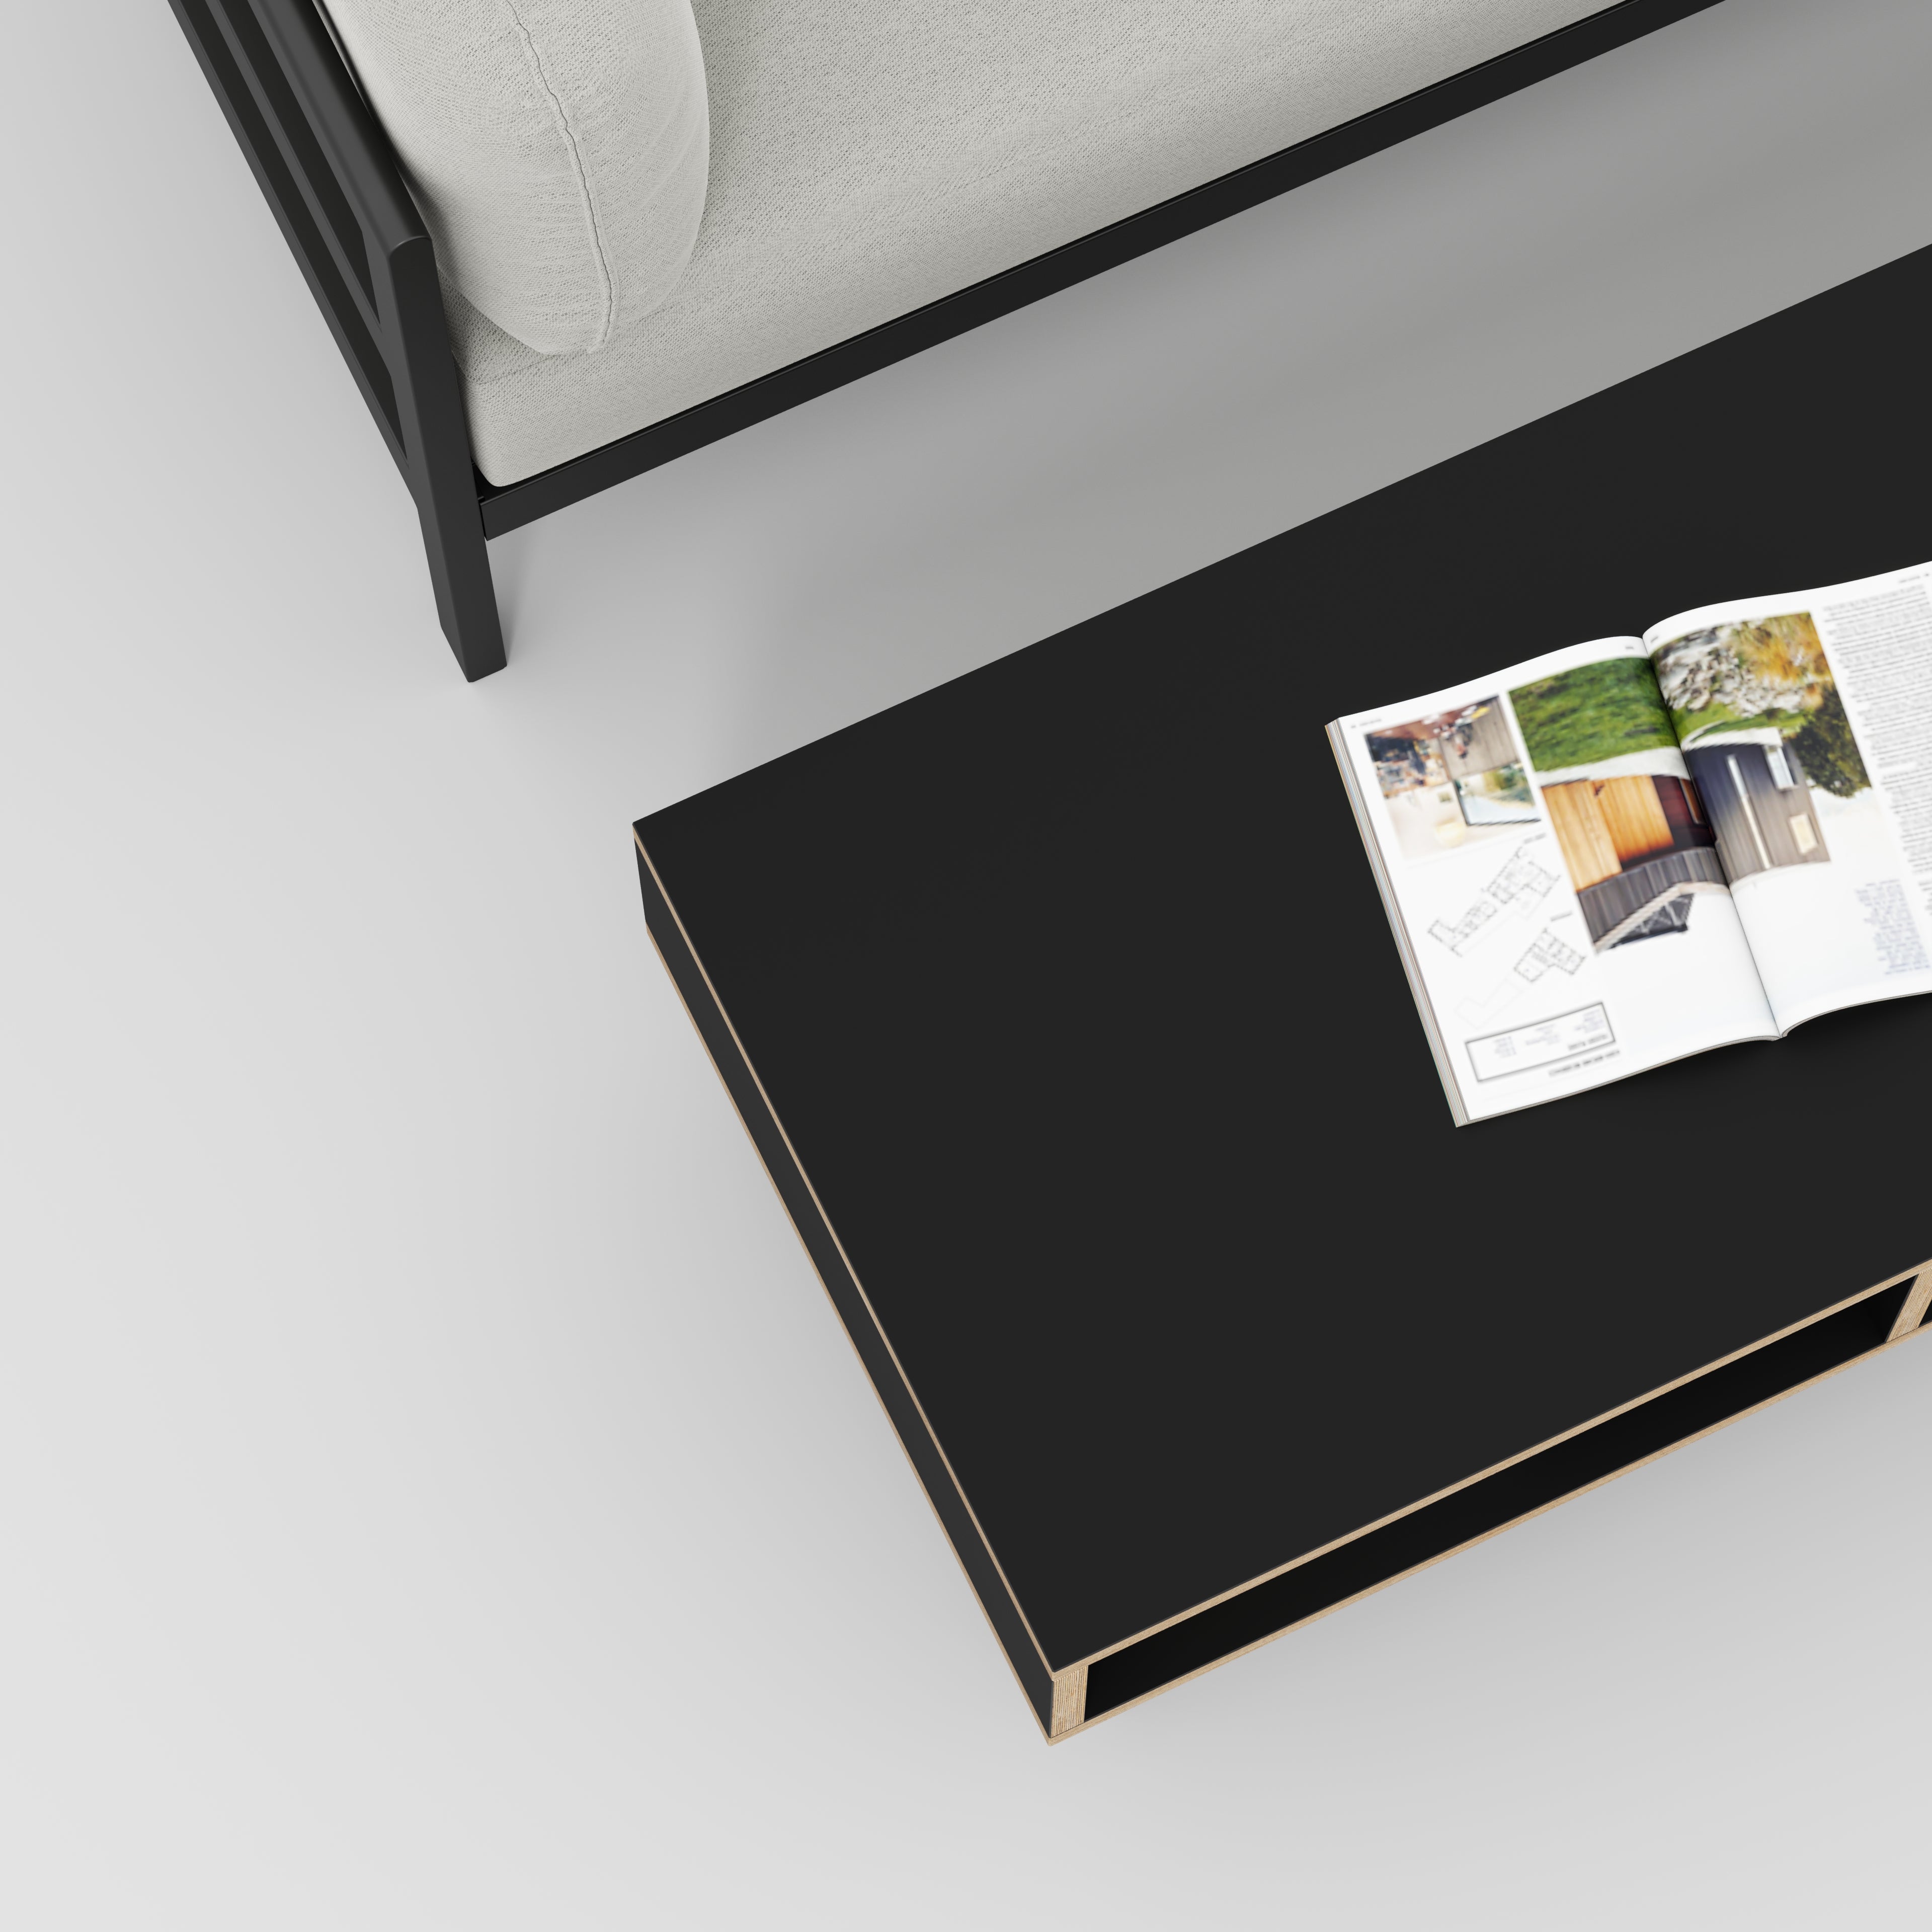 Coffee Table with Box Storage and Black Hairpin Legs - Formica Diamond Black - 1200(w) x 600(d) x 400(h)